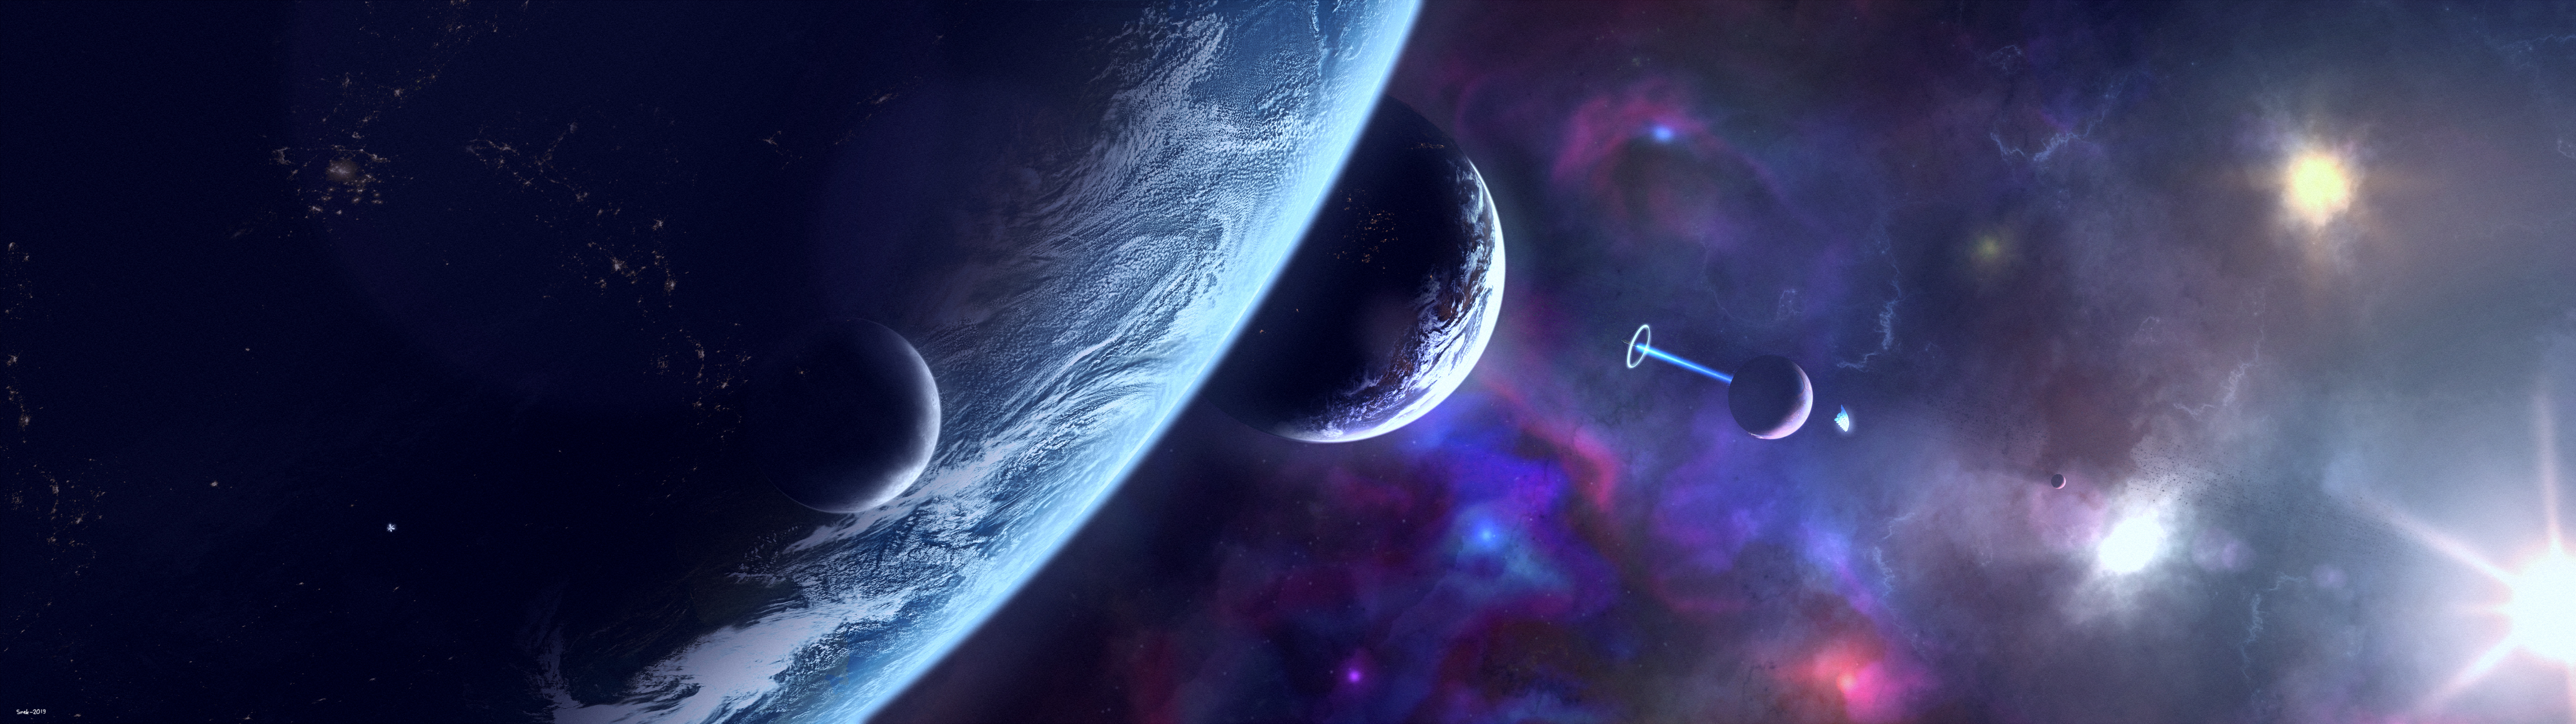 Planet Space 7680x2160